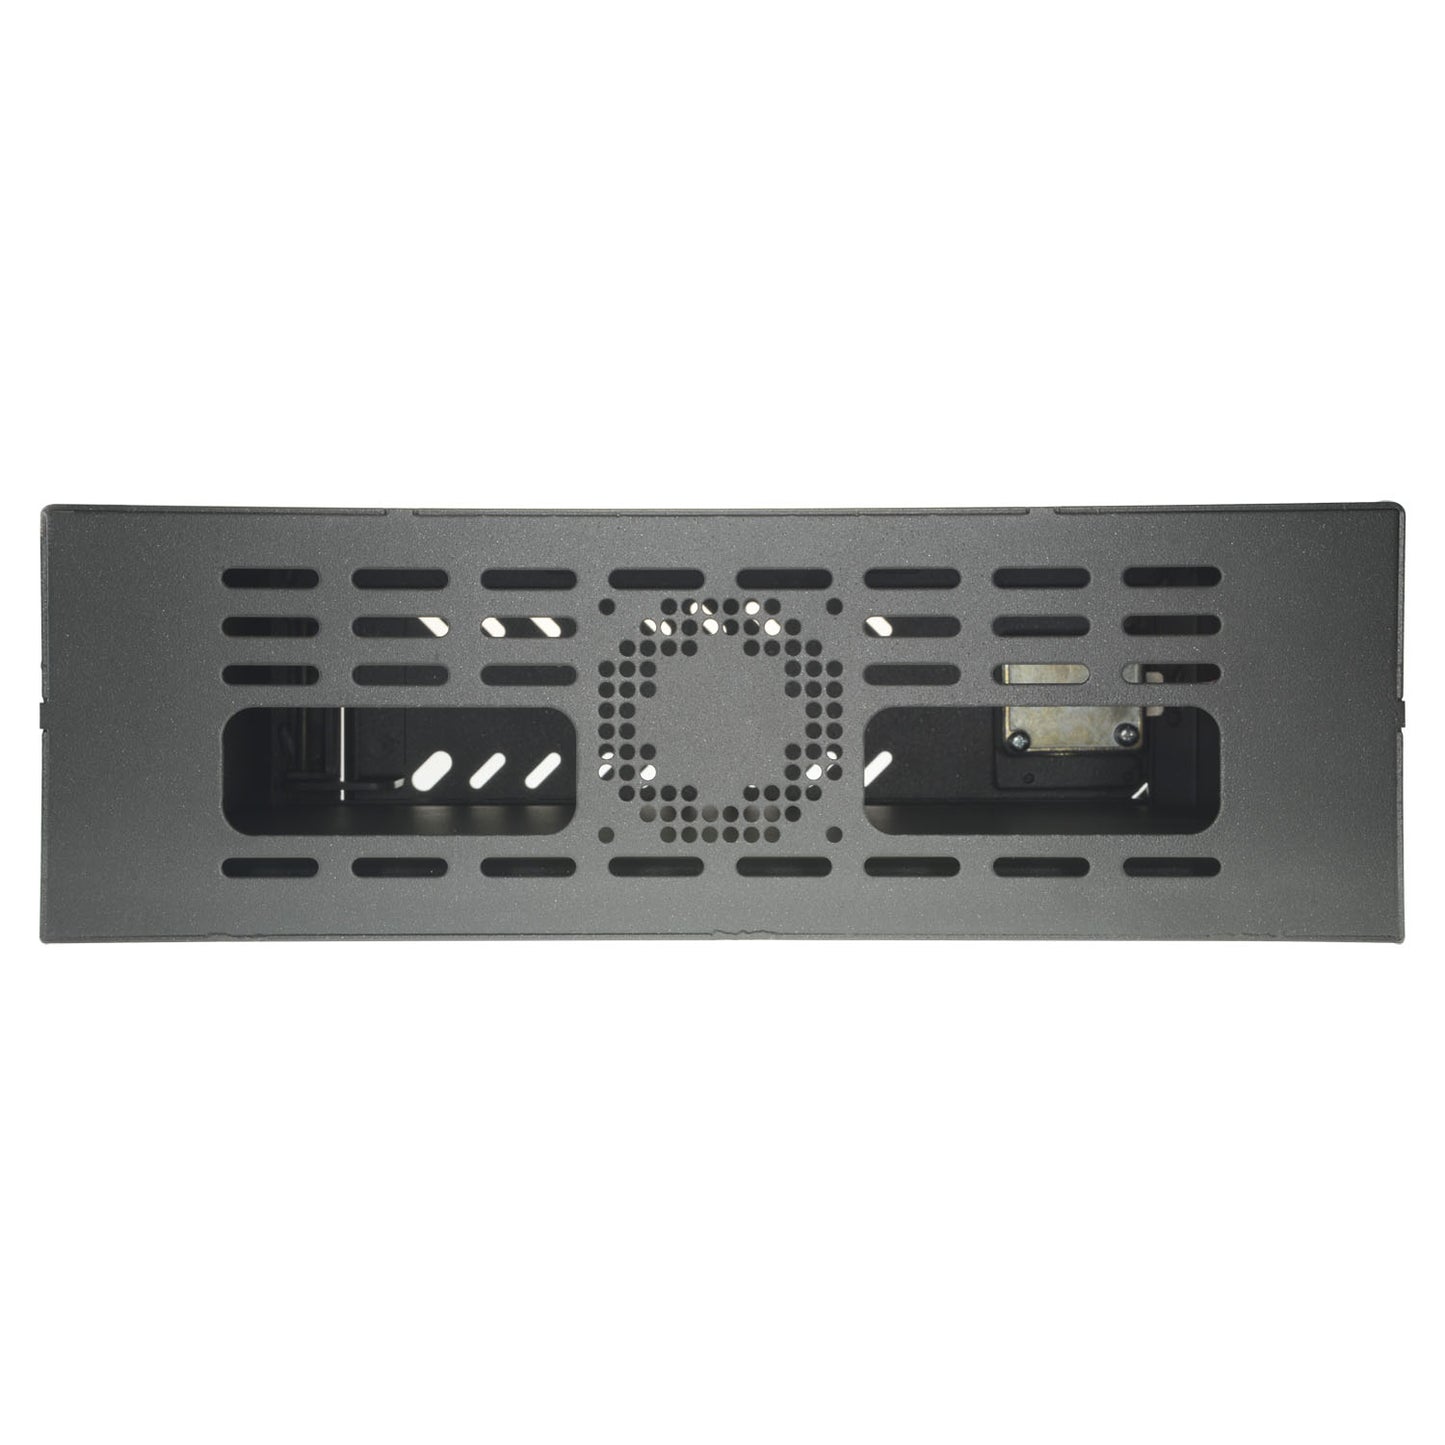 Safe for DVRs - Specific for CCTV - For DVRs smaller than 1U rack - Electronic locking - With ventilation and cable glands - Quality and resistance